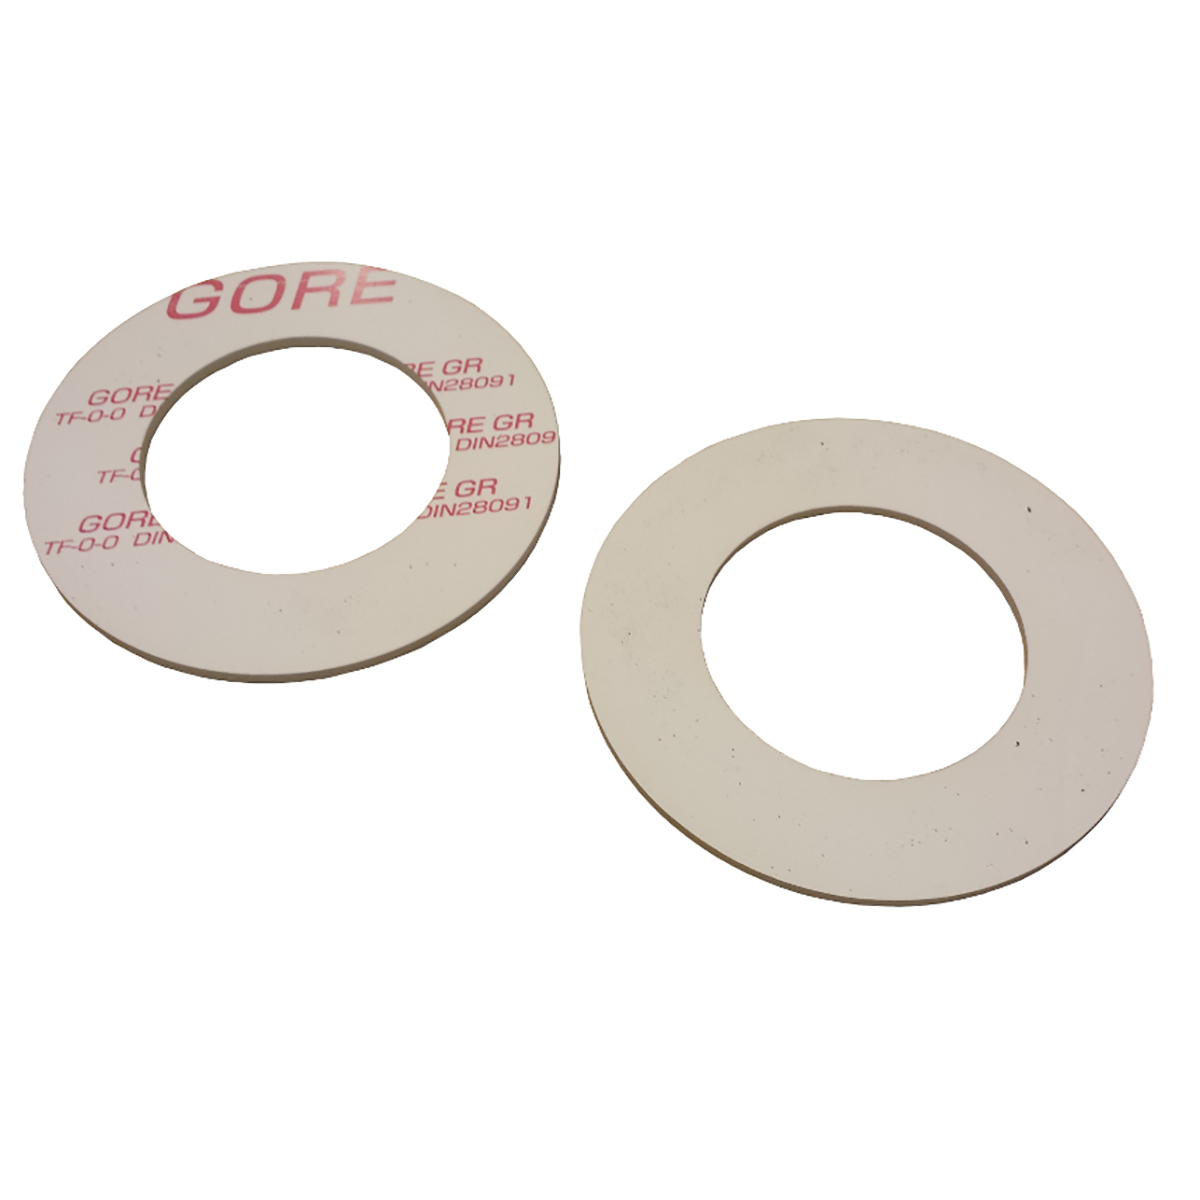 White Pack of 1 Gore-Gr Expanded PTFE Sheet Gasket 6 × 6 1/8 Thick 